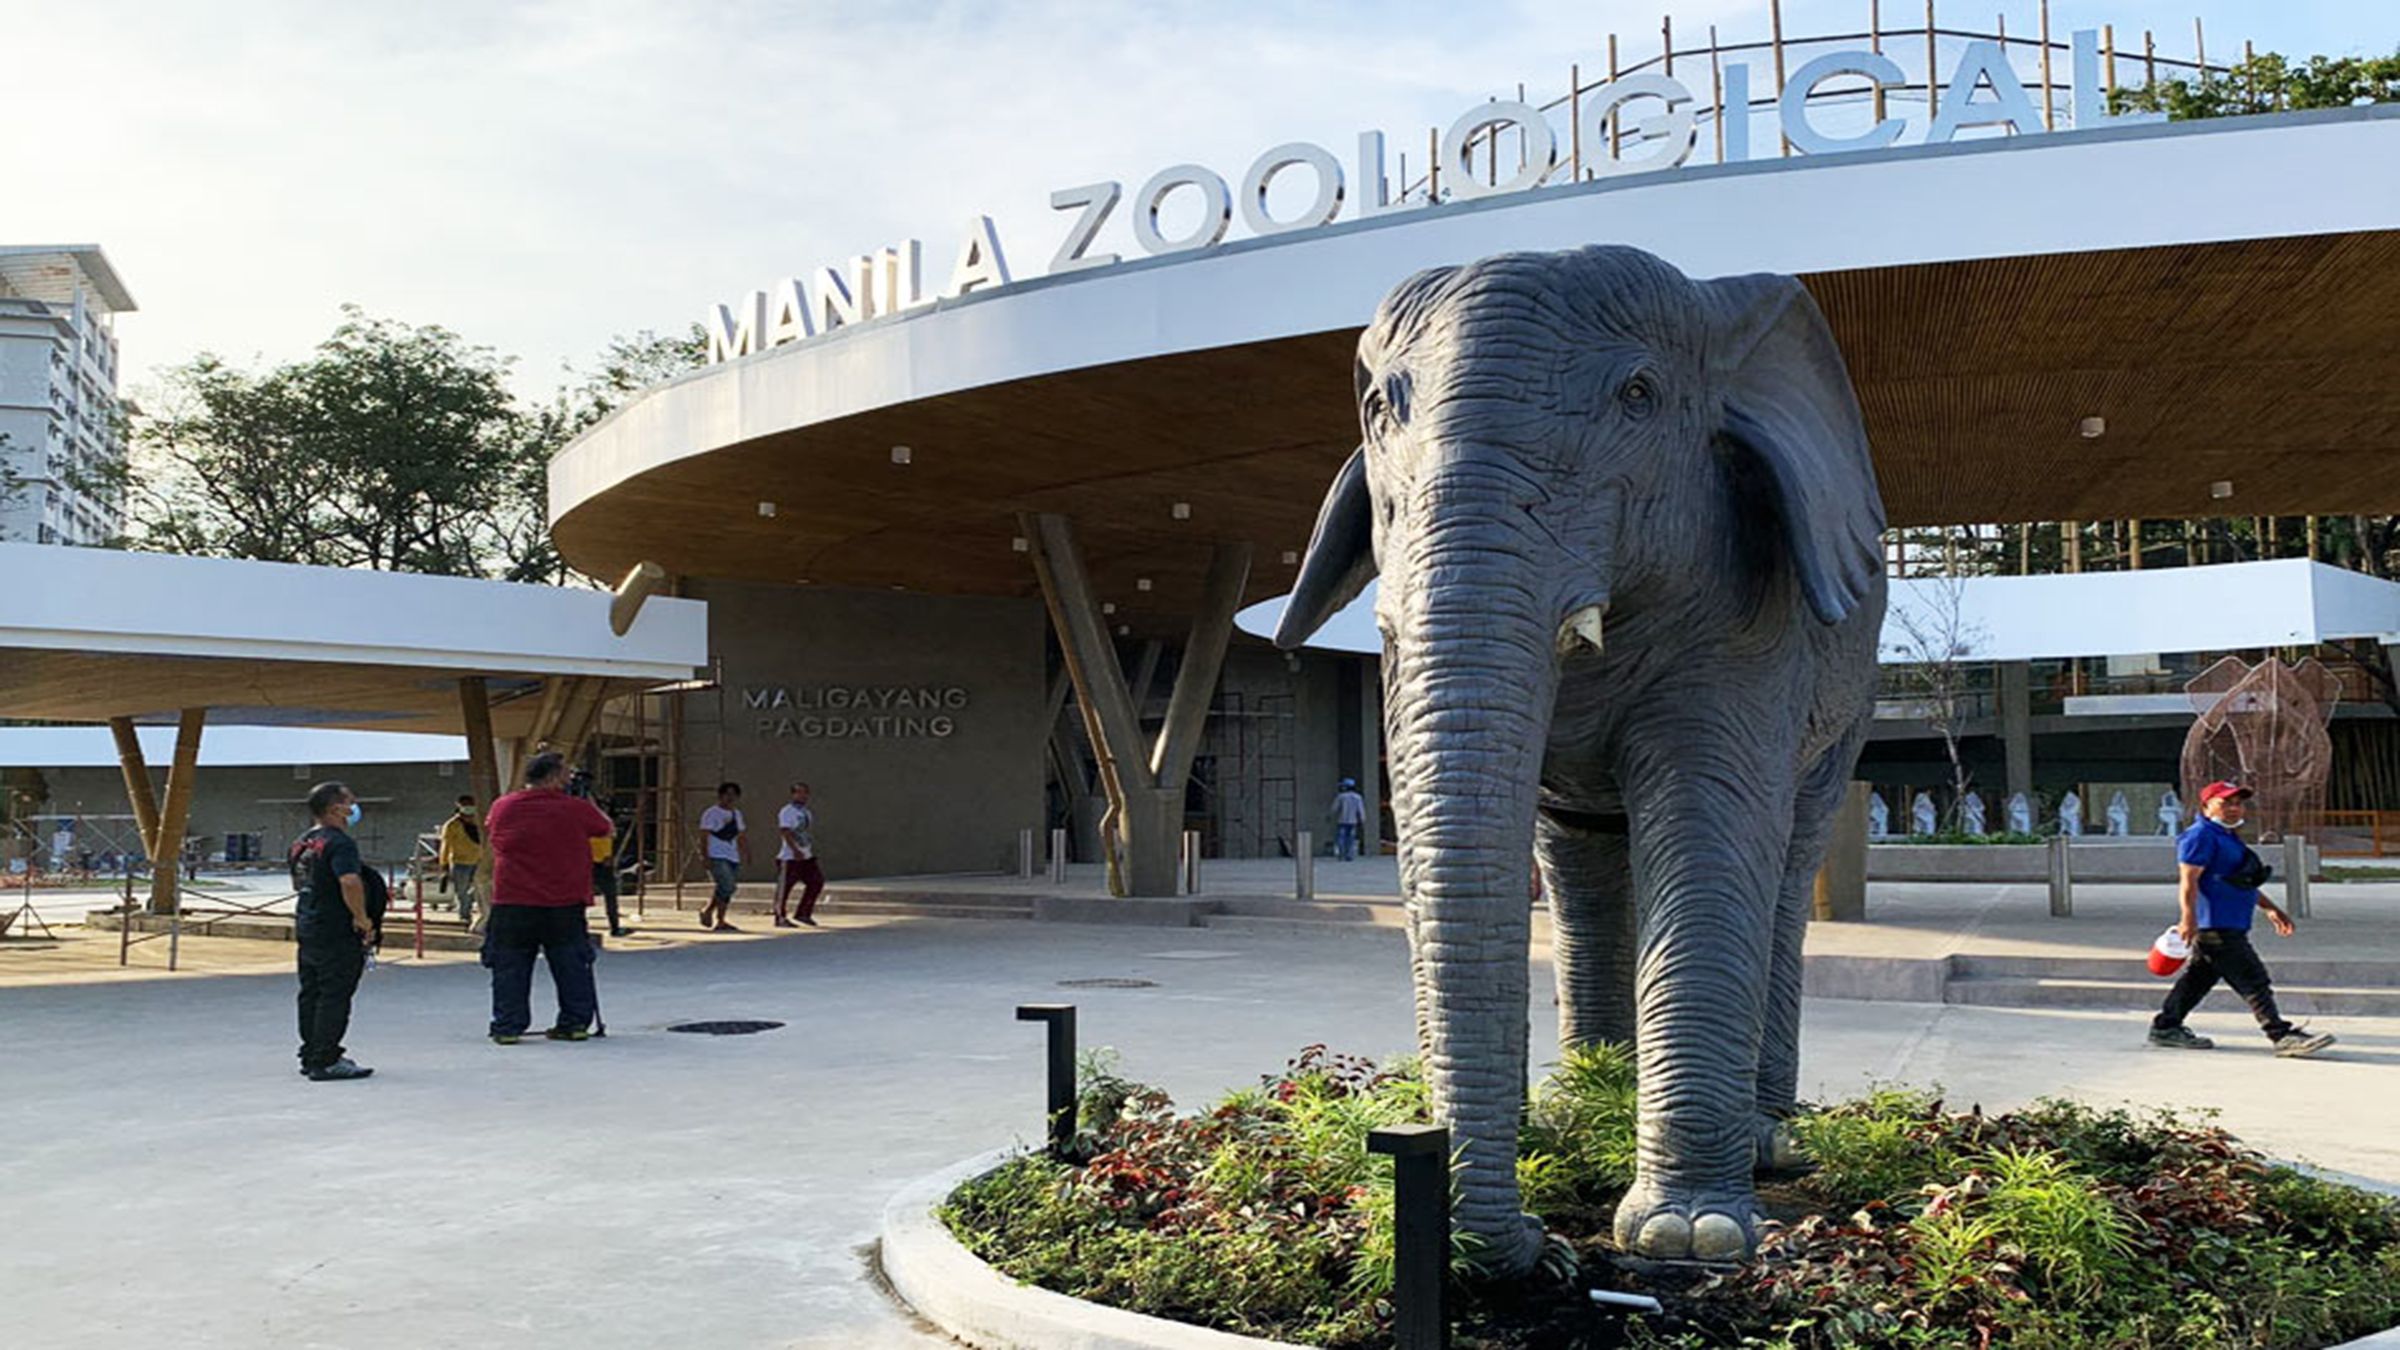 Manila Zoo reopens today